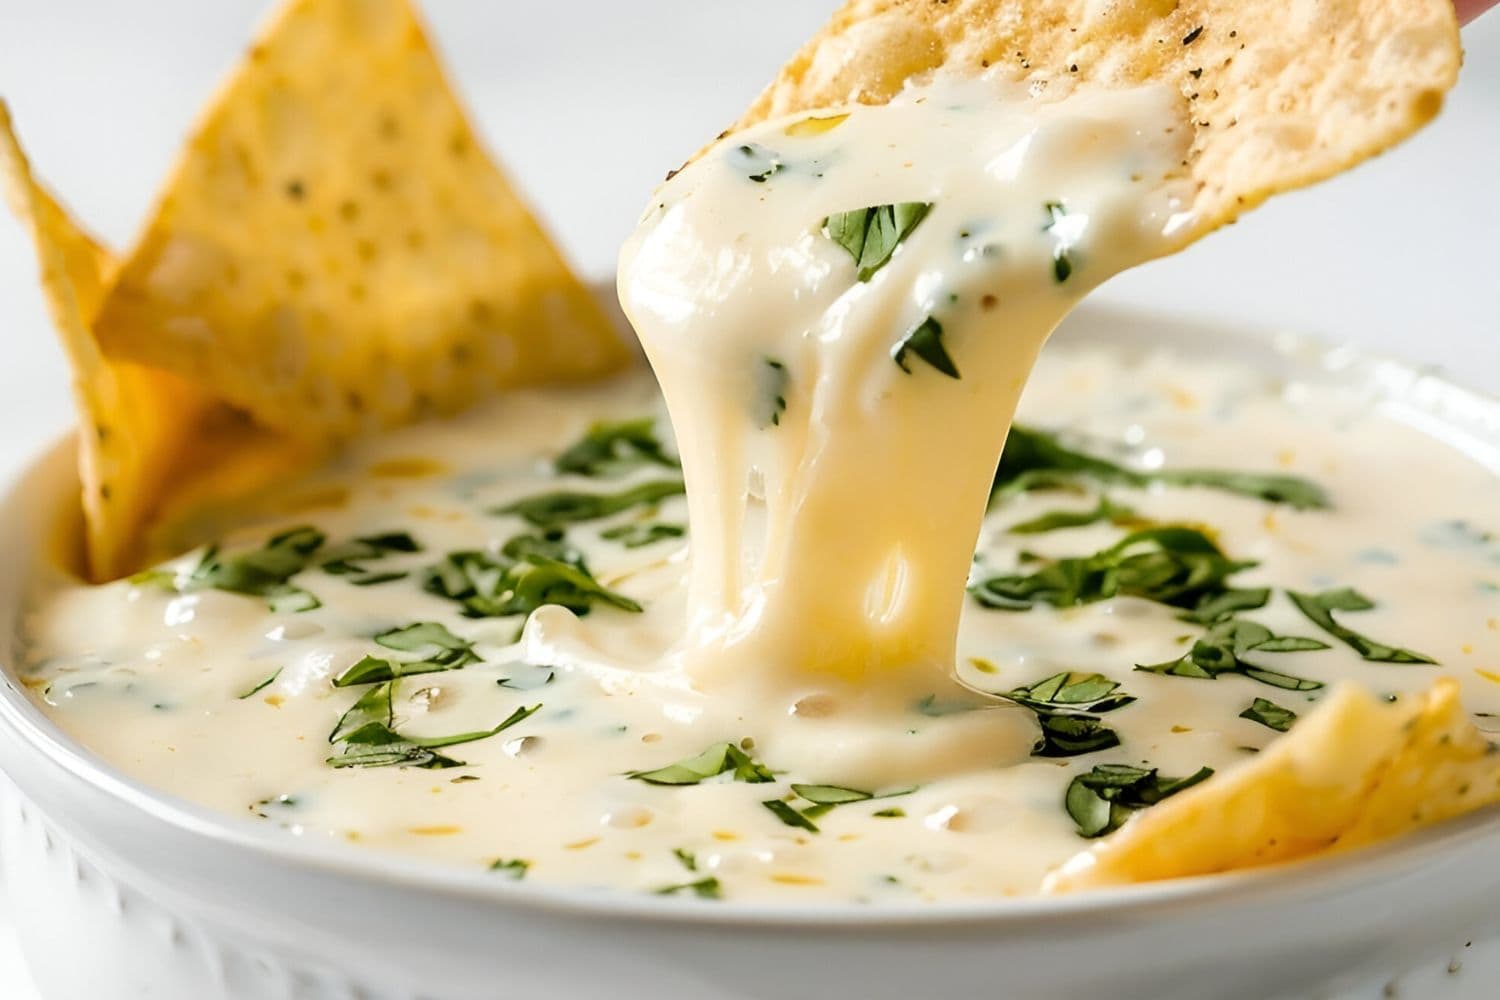 Dipping Chip into Mexican White Queso Cheese Dip in a White Bowl with Satisfying Cheese Pull